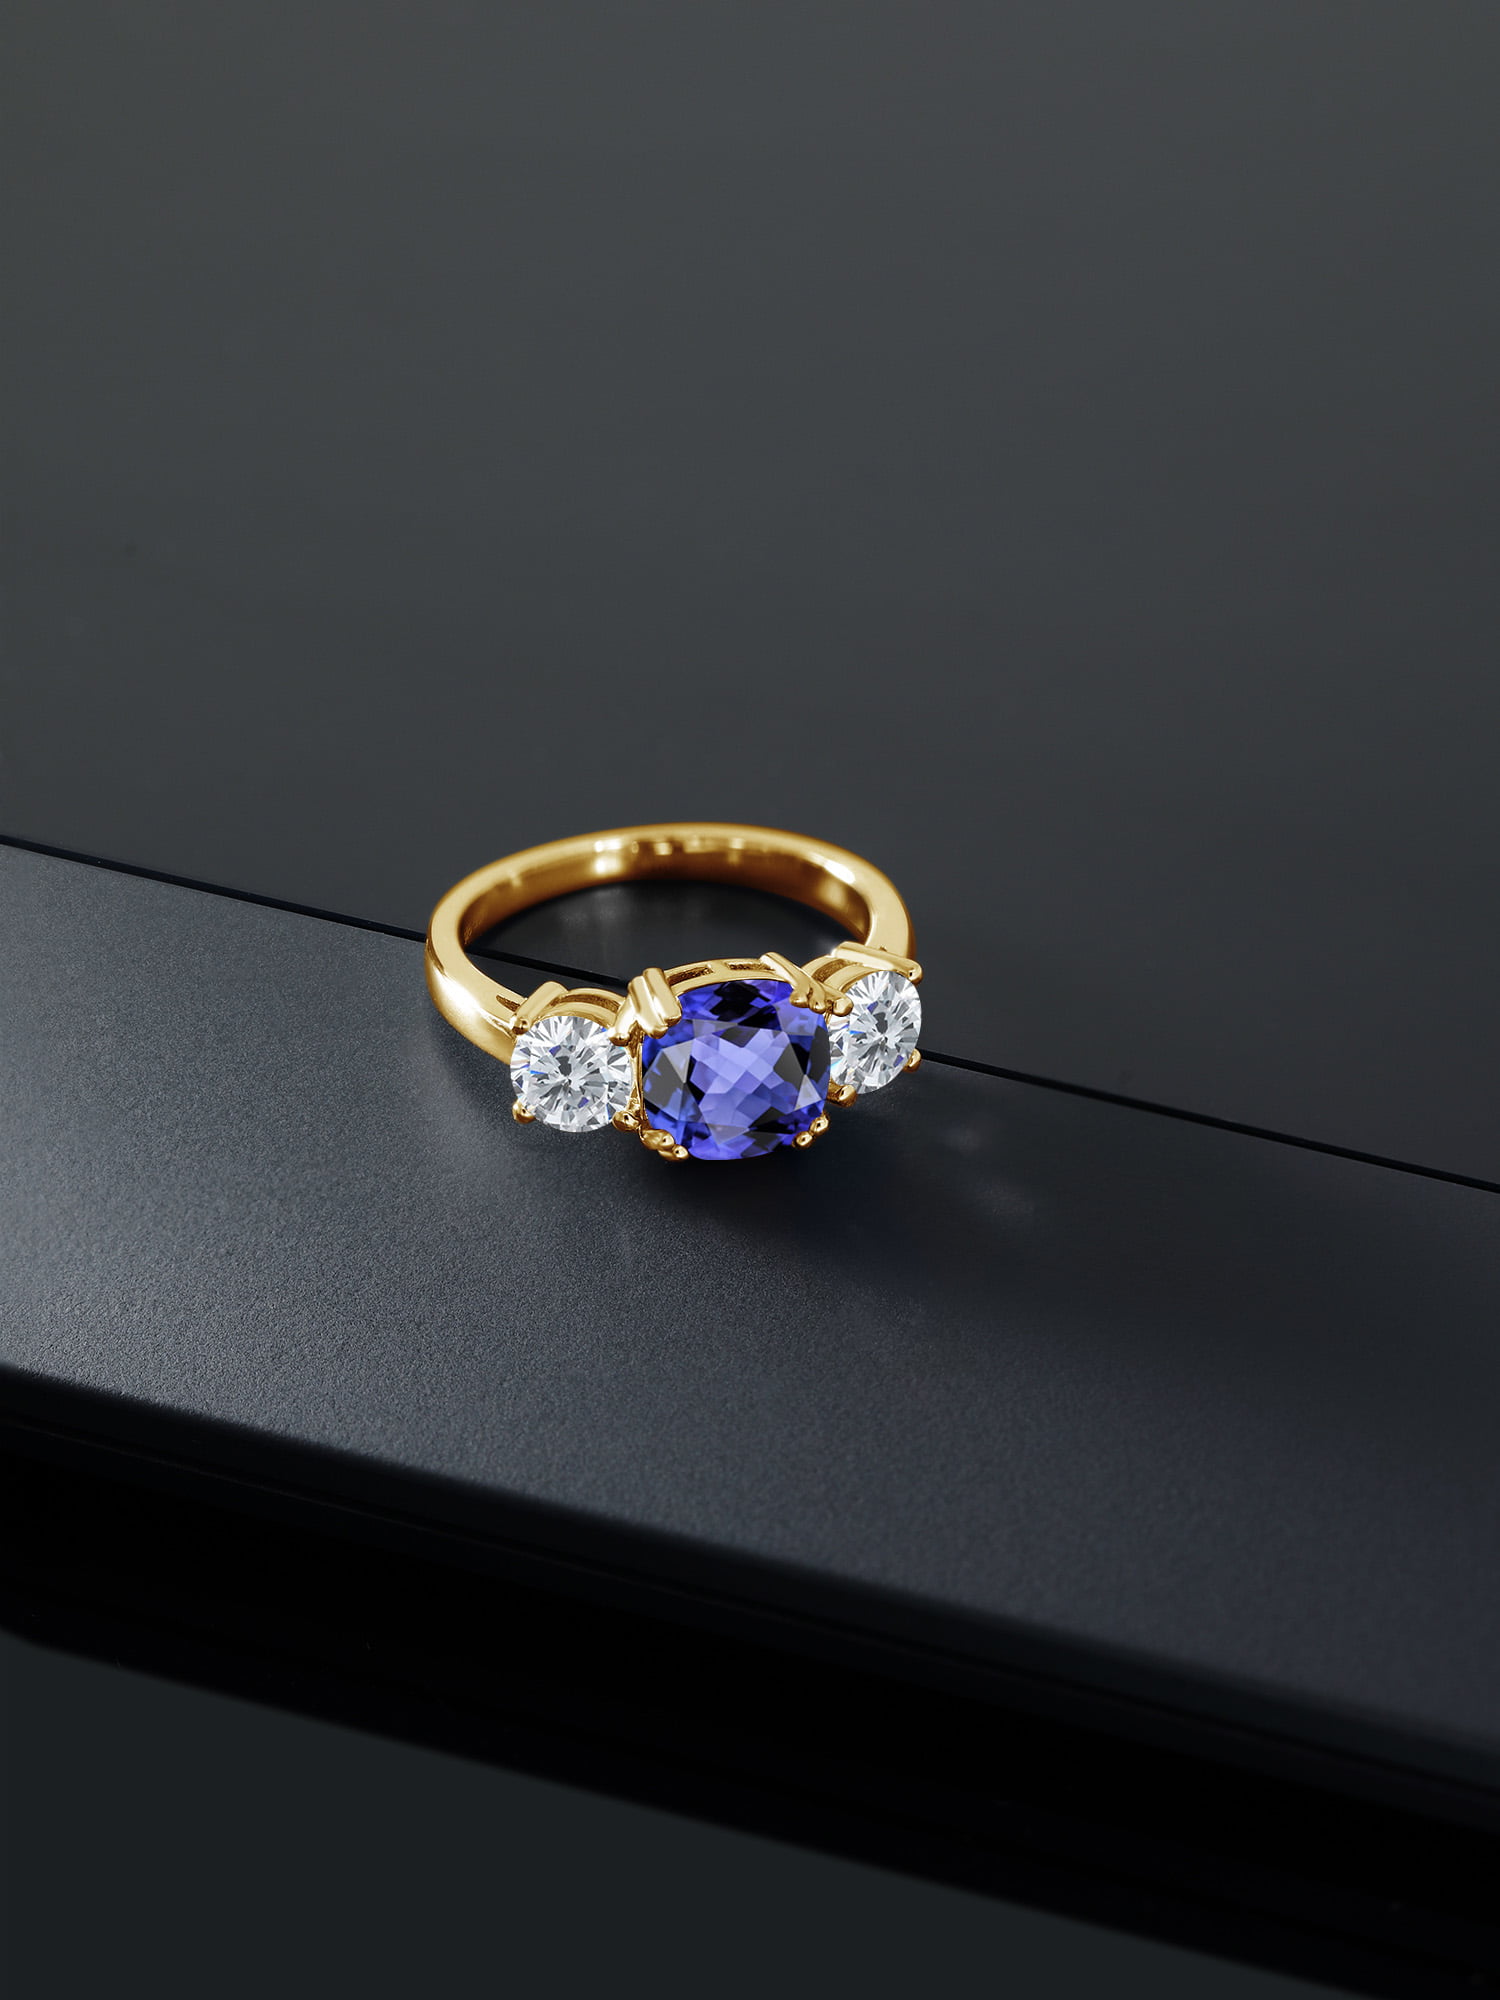 Details about   2.50Ct Round Cut Tanzanite Halo Engagement Ring In Solid 14K Rose Gold Finish 